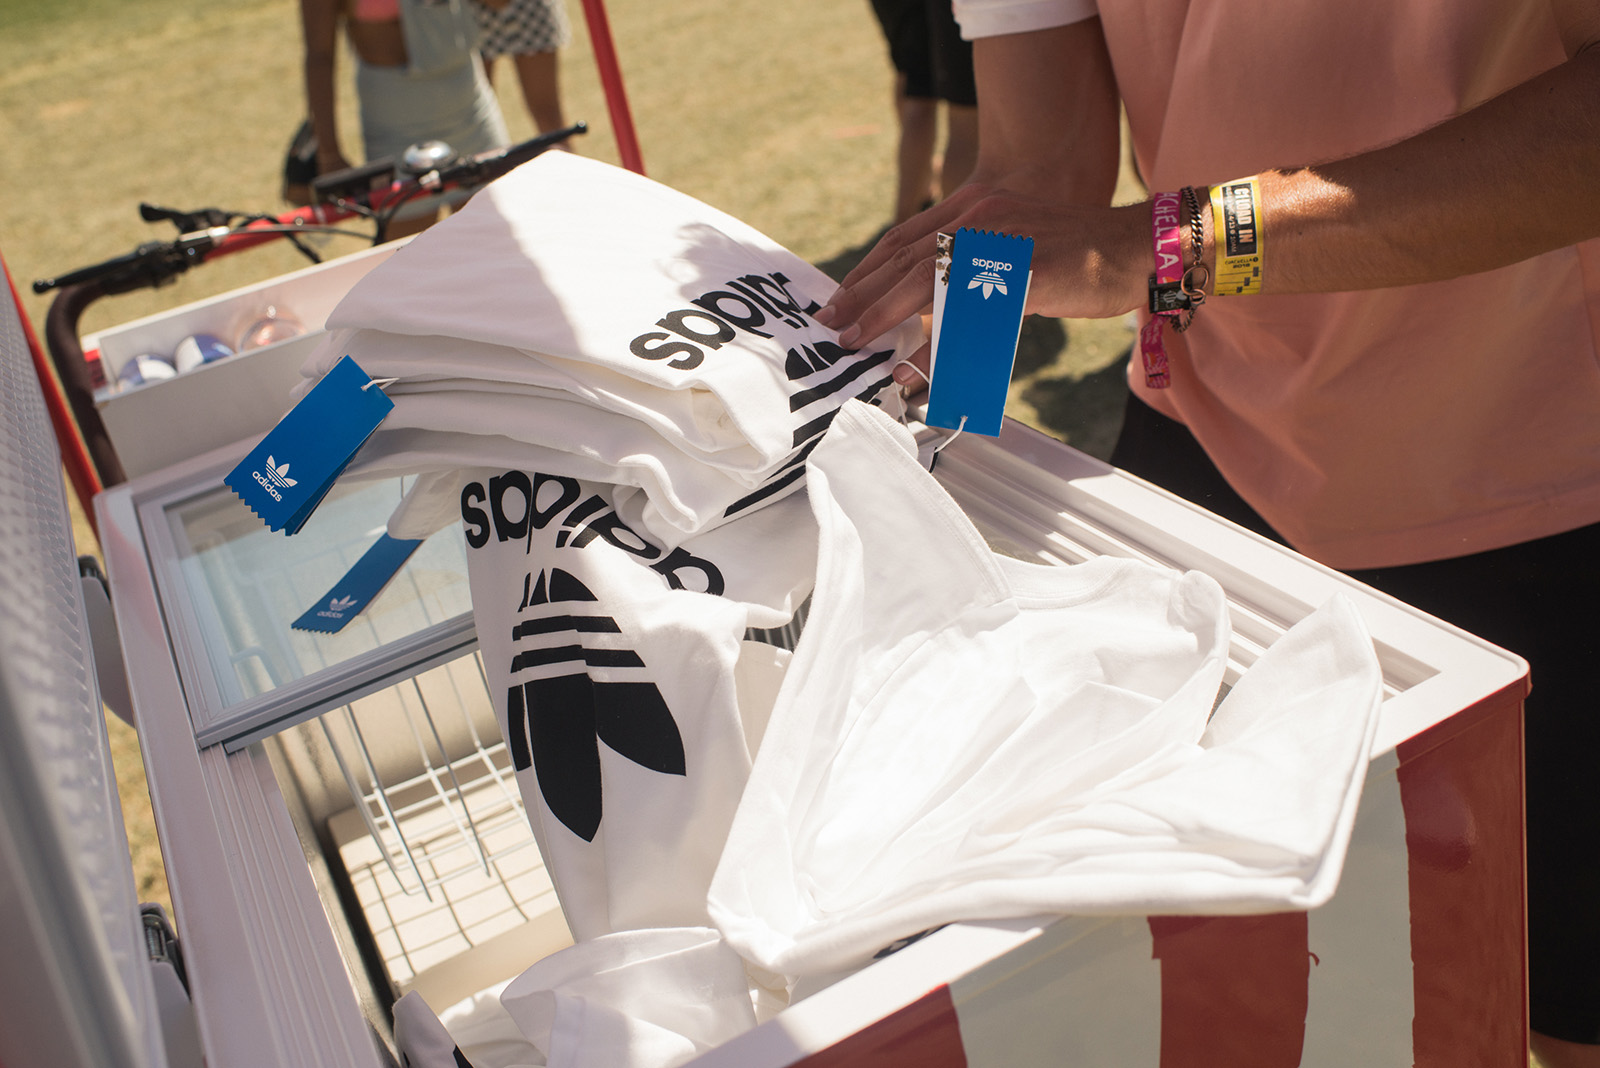 Folded adidas shirts being pulled out of a red ice cream cart.